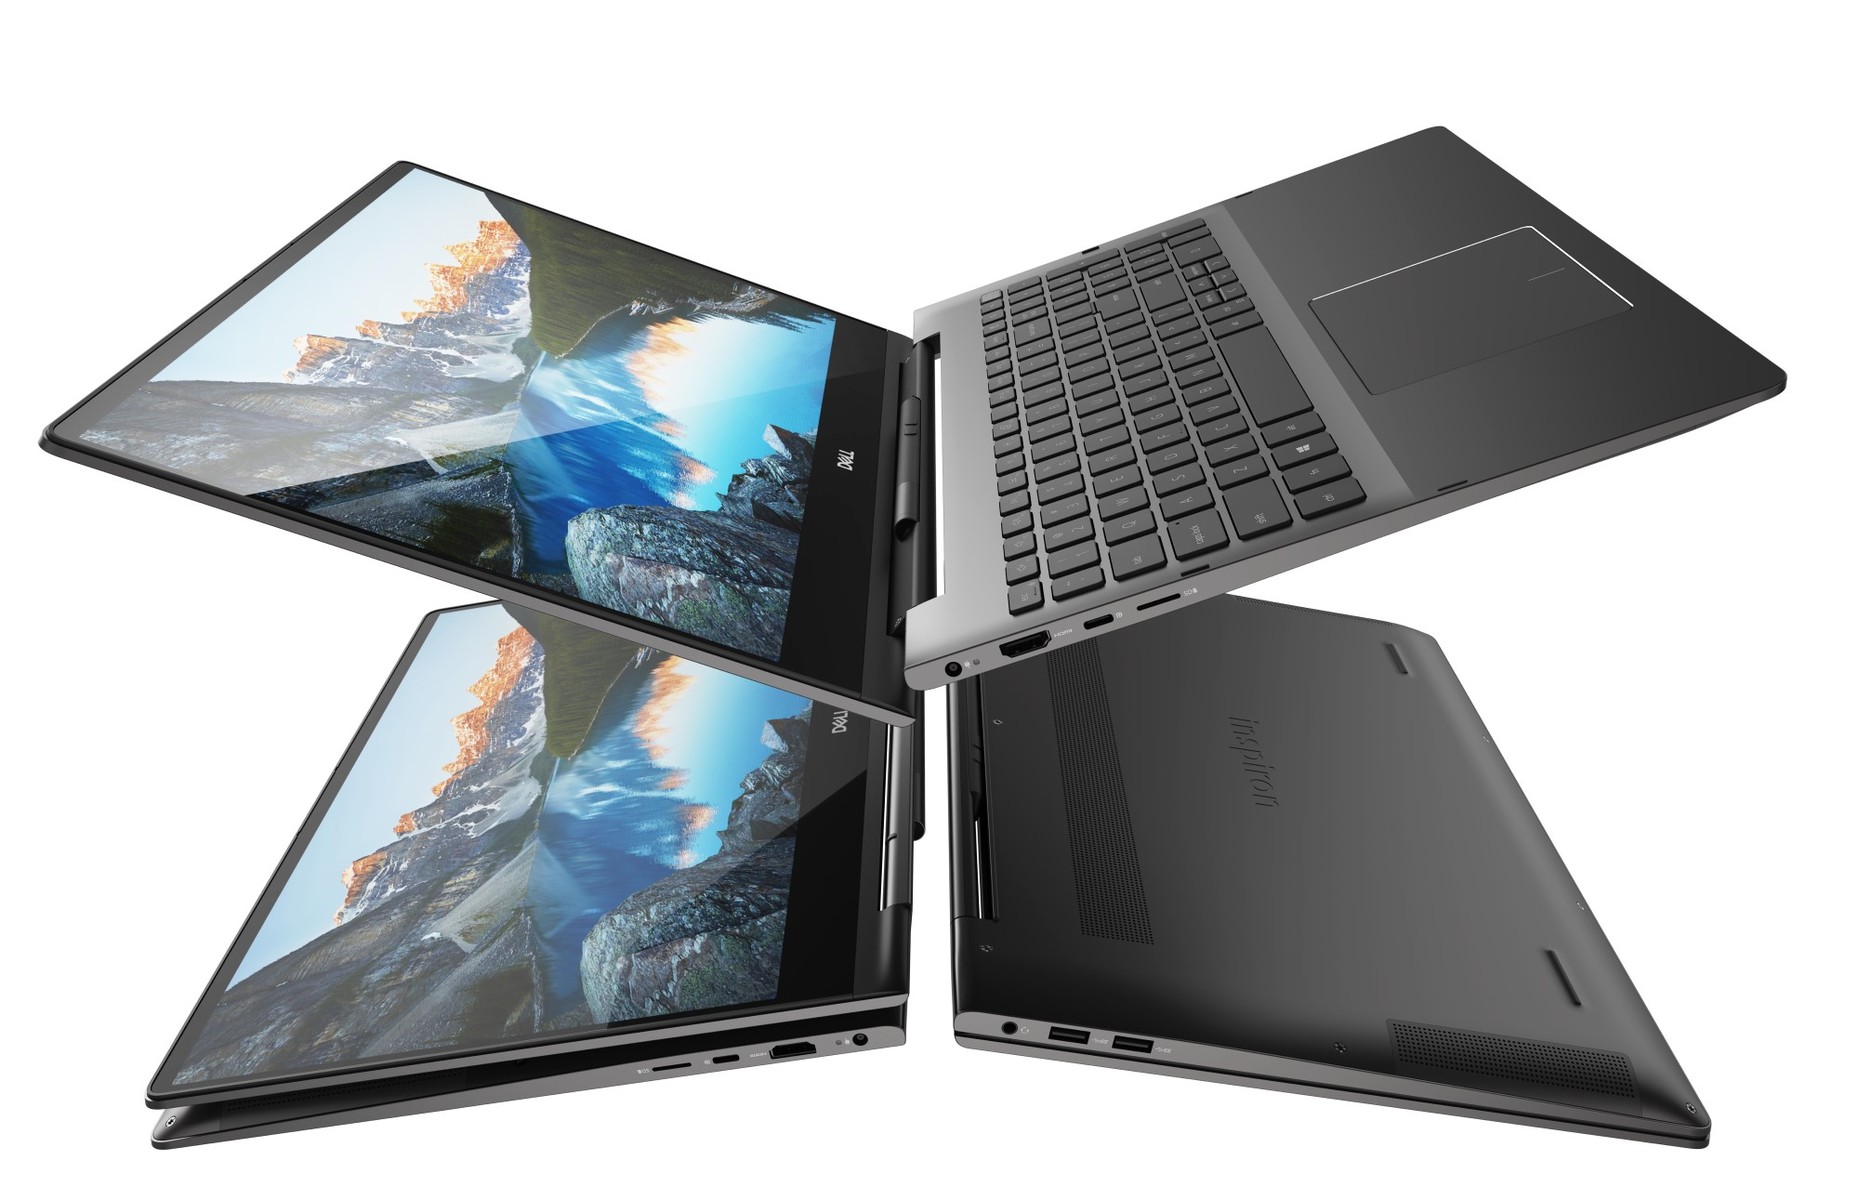 Dell Updates The Inspiron 13 7000 2 In 1 And Inspiron 15 7000 2 In 1 Black Editions With New Pen Garage And Keyboard Notebookcheck Net News